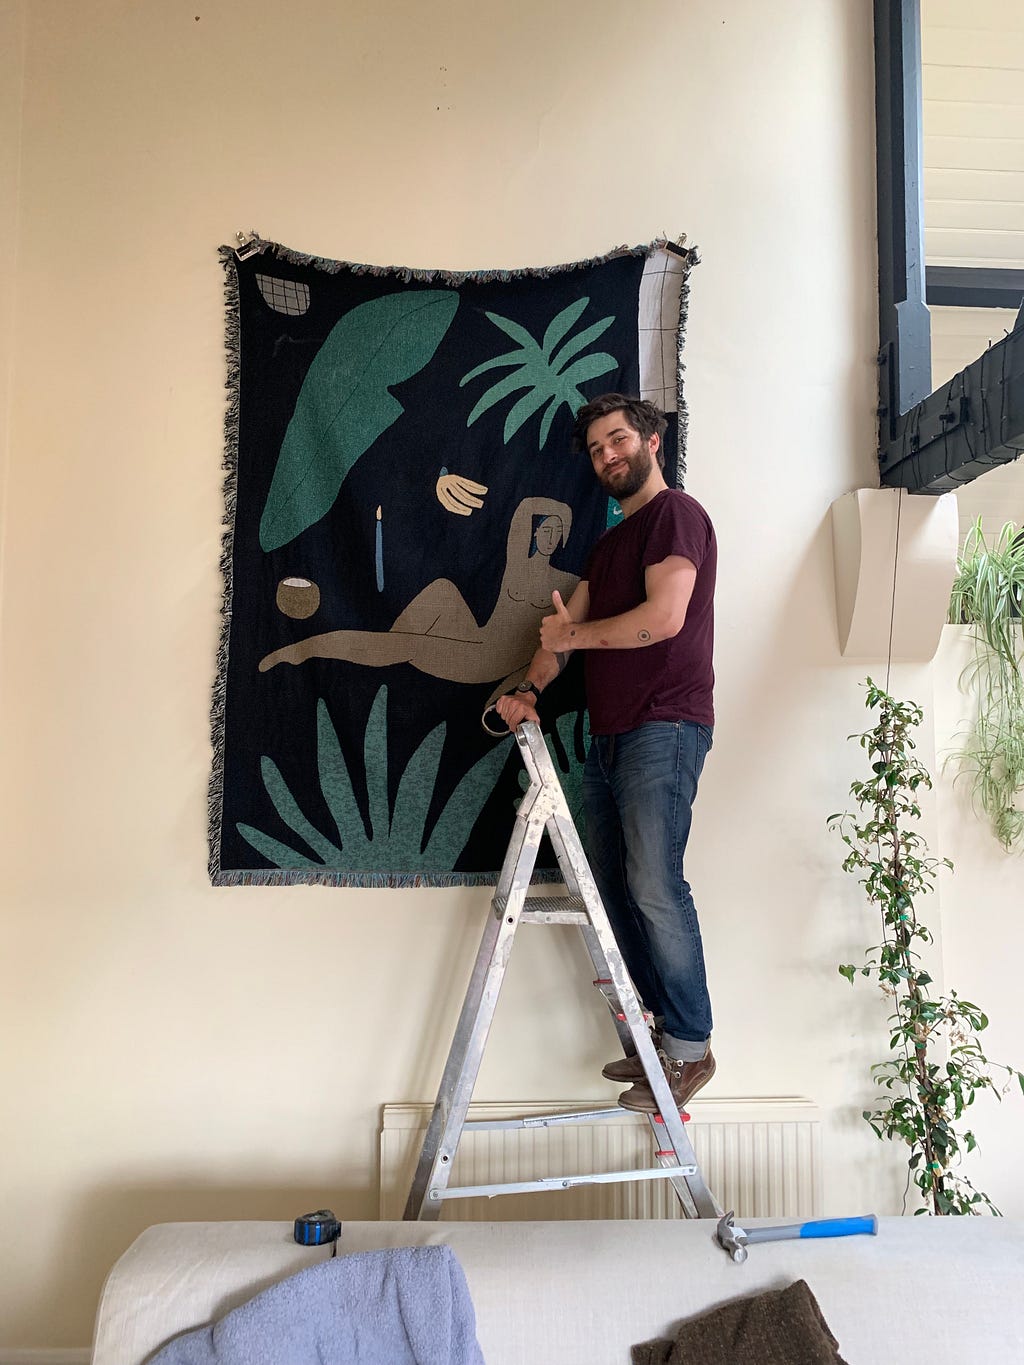 The author stood on a ladder looking very pleased with himself after hanging a large tapestry wall hanging.